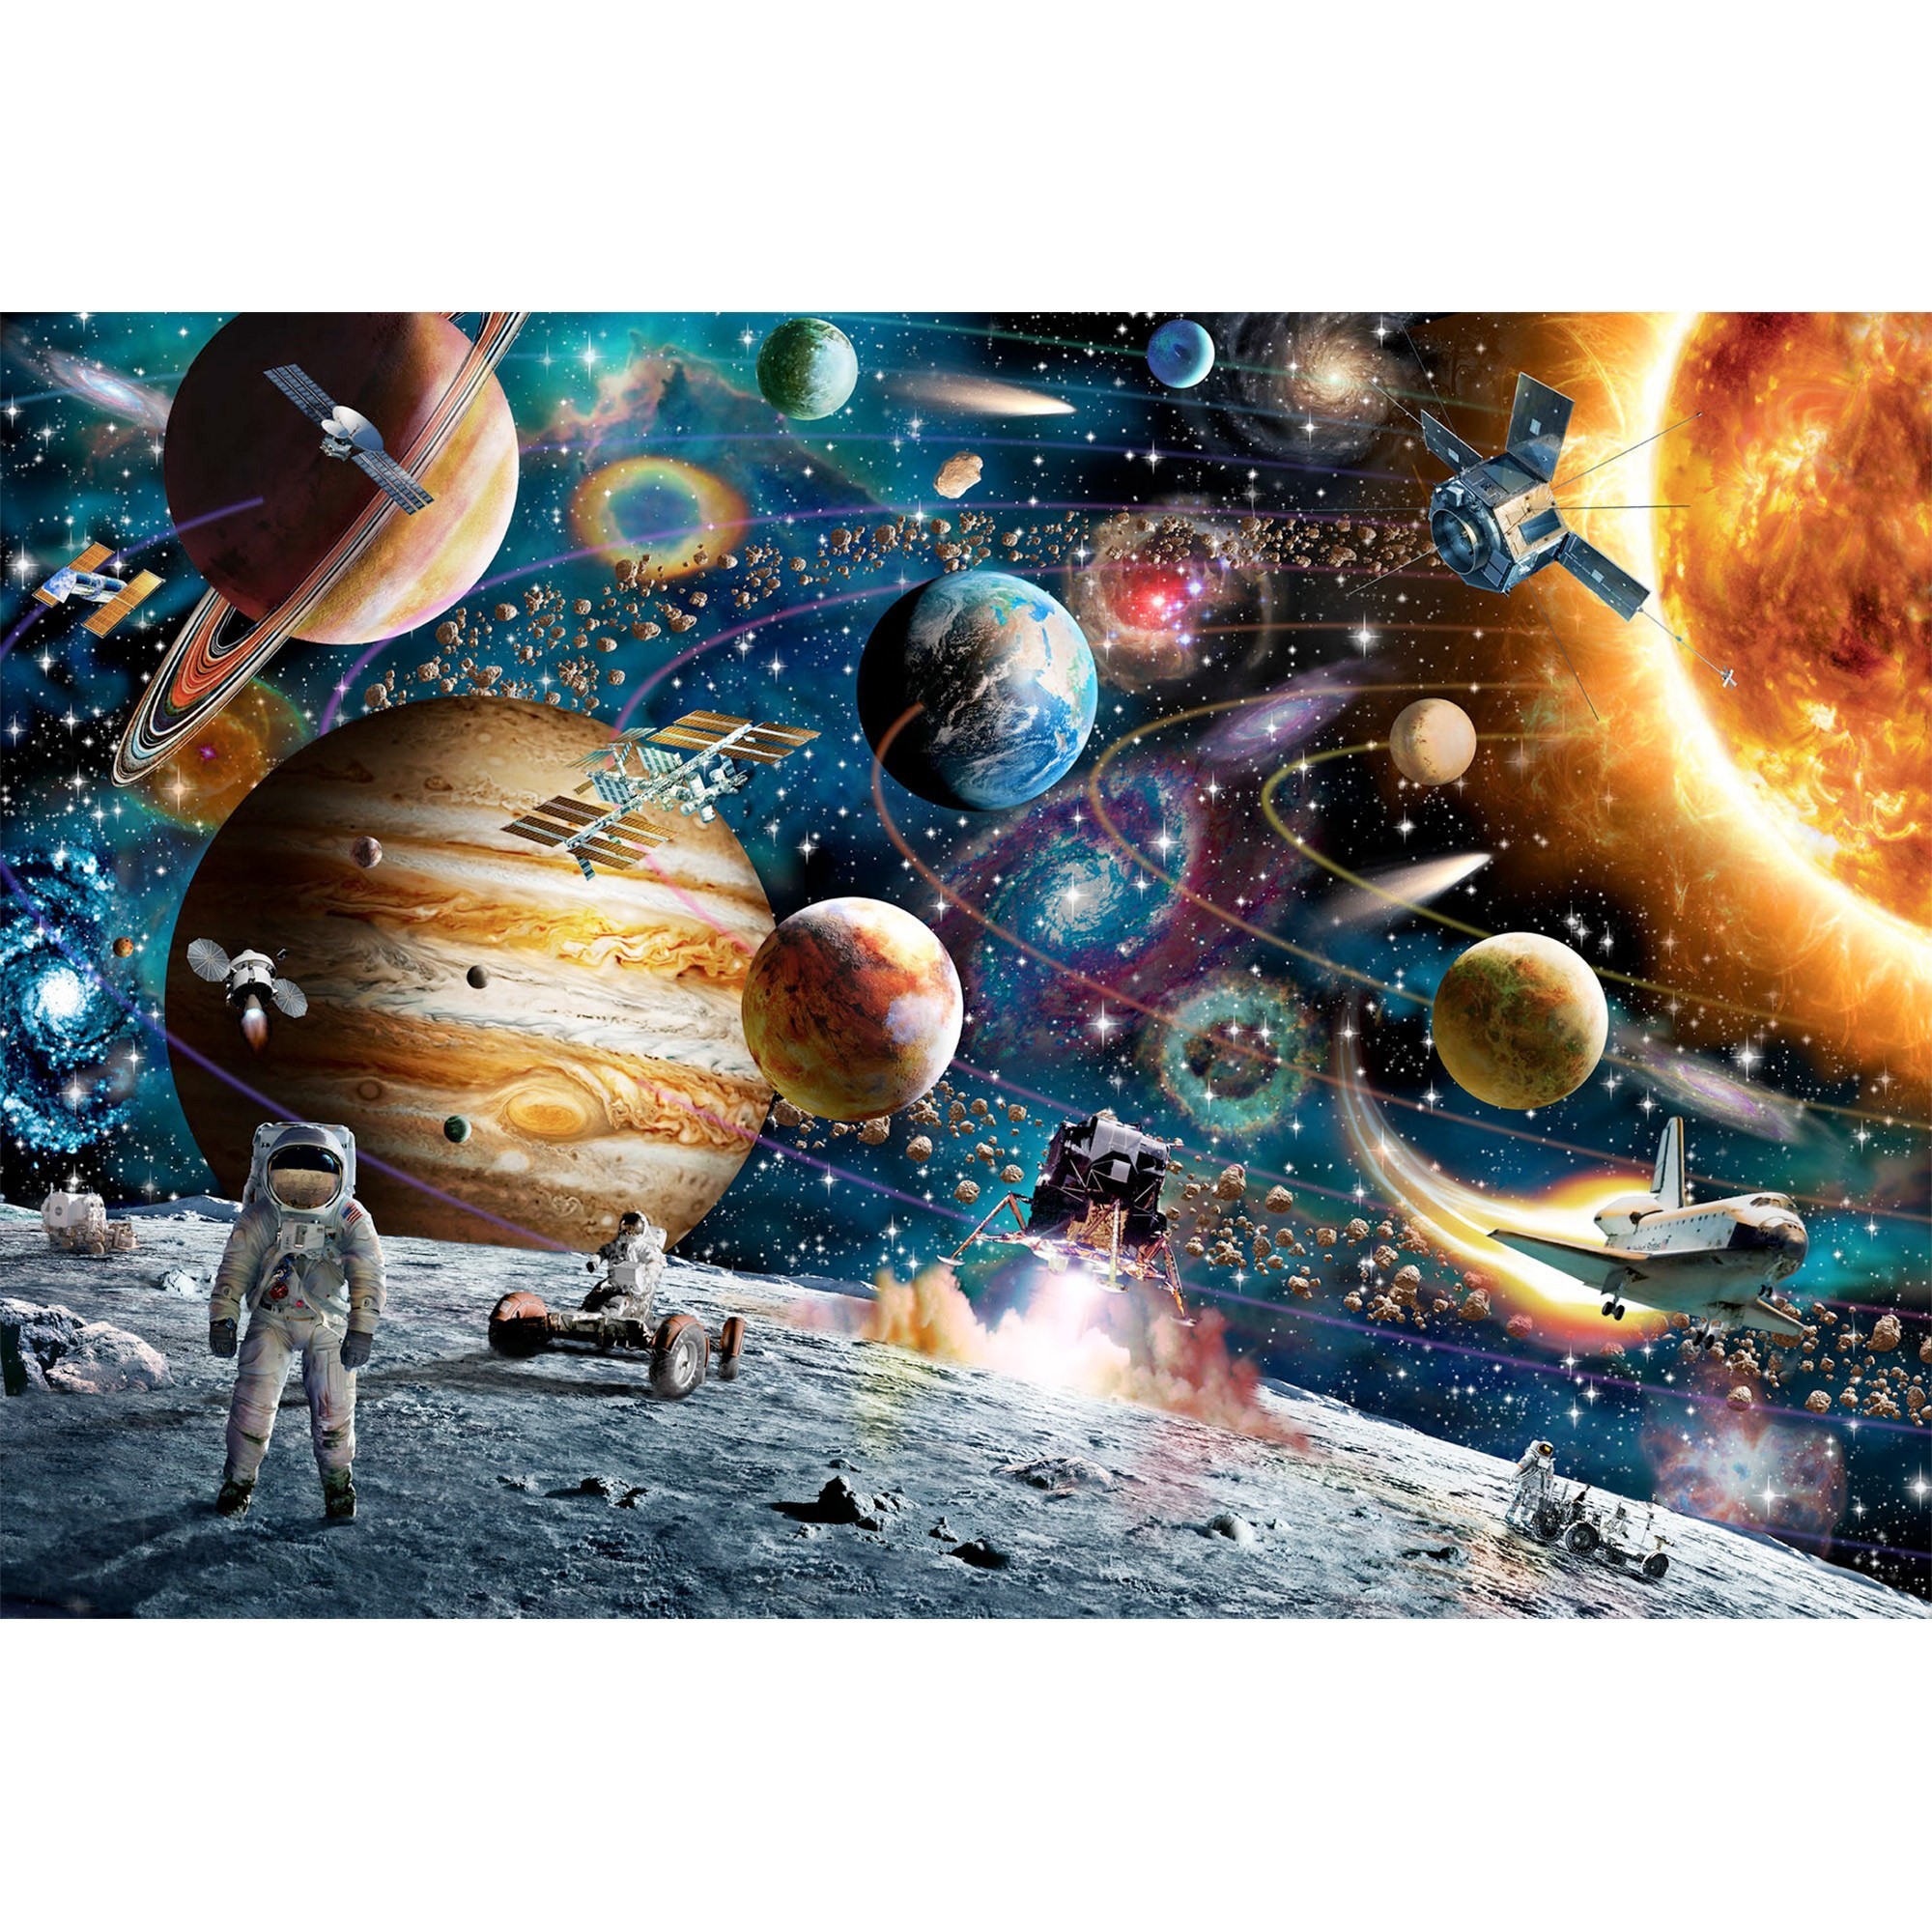 Ravensburger - Outer Space - 60 Pieces